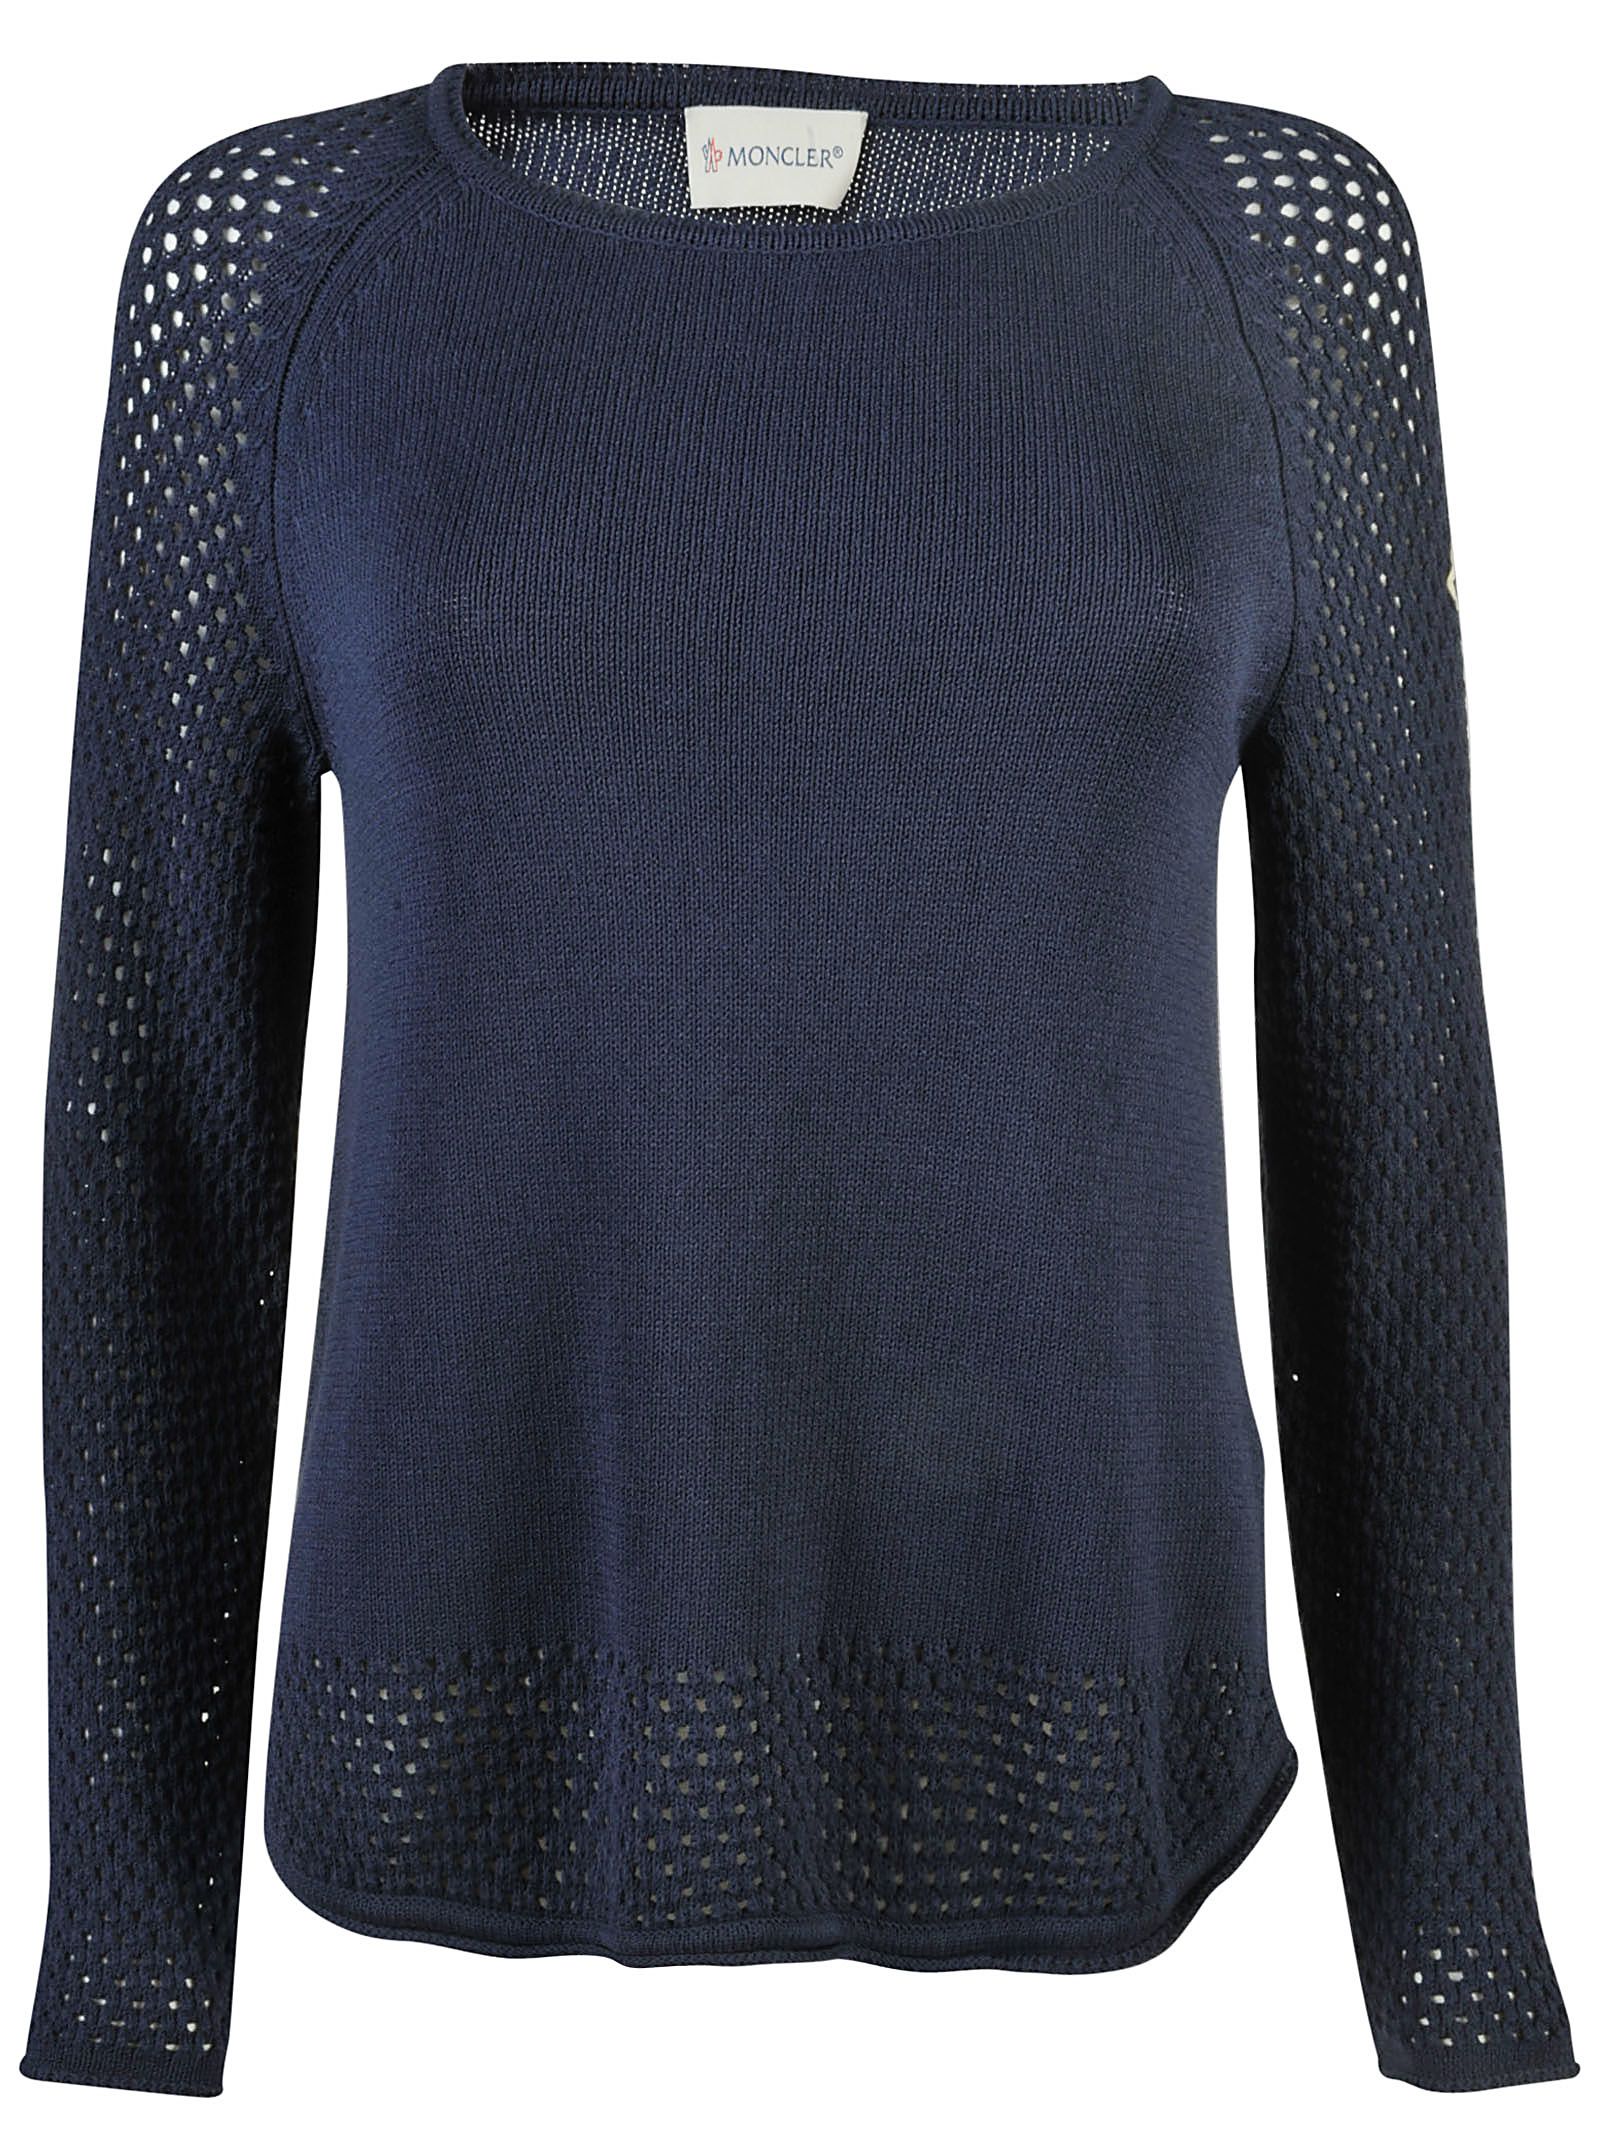 Moncler - Moncler Tricot Mesh Sweater - Navy Blue, Women's Sweaters ...